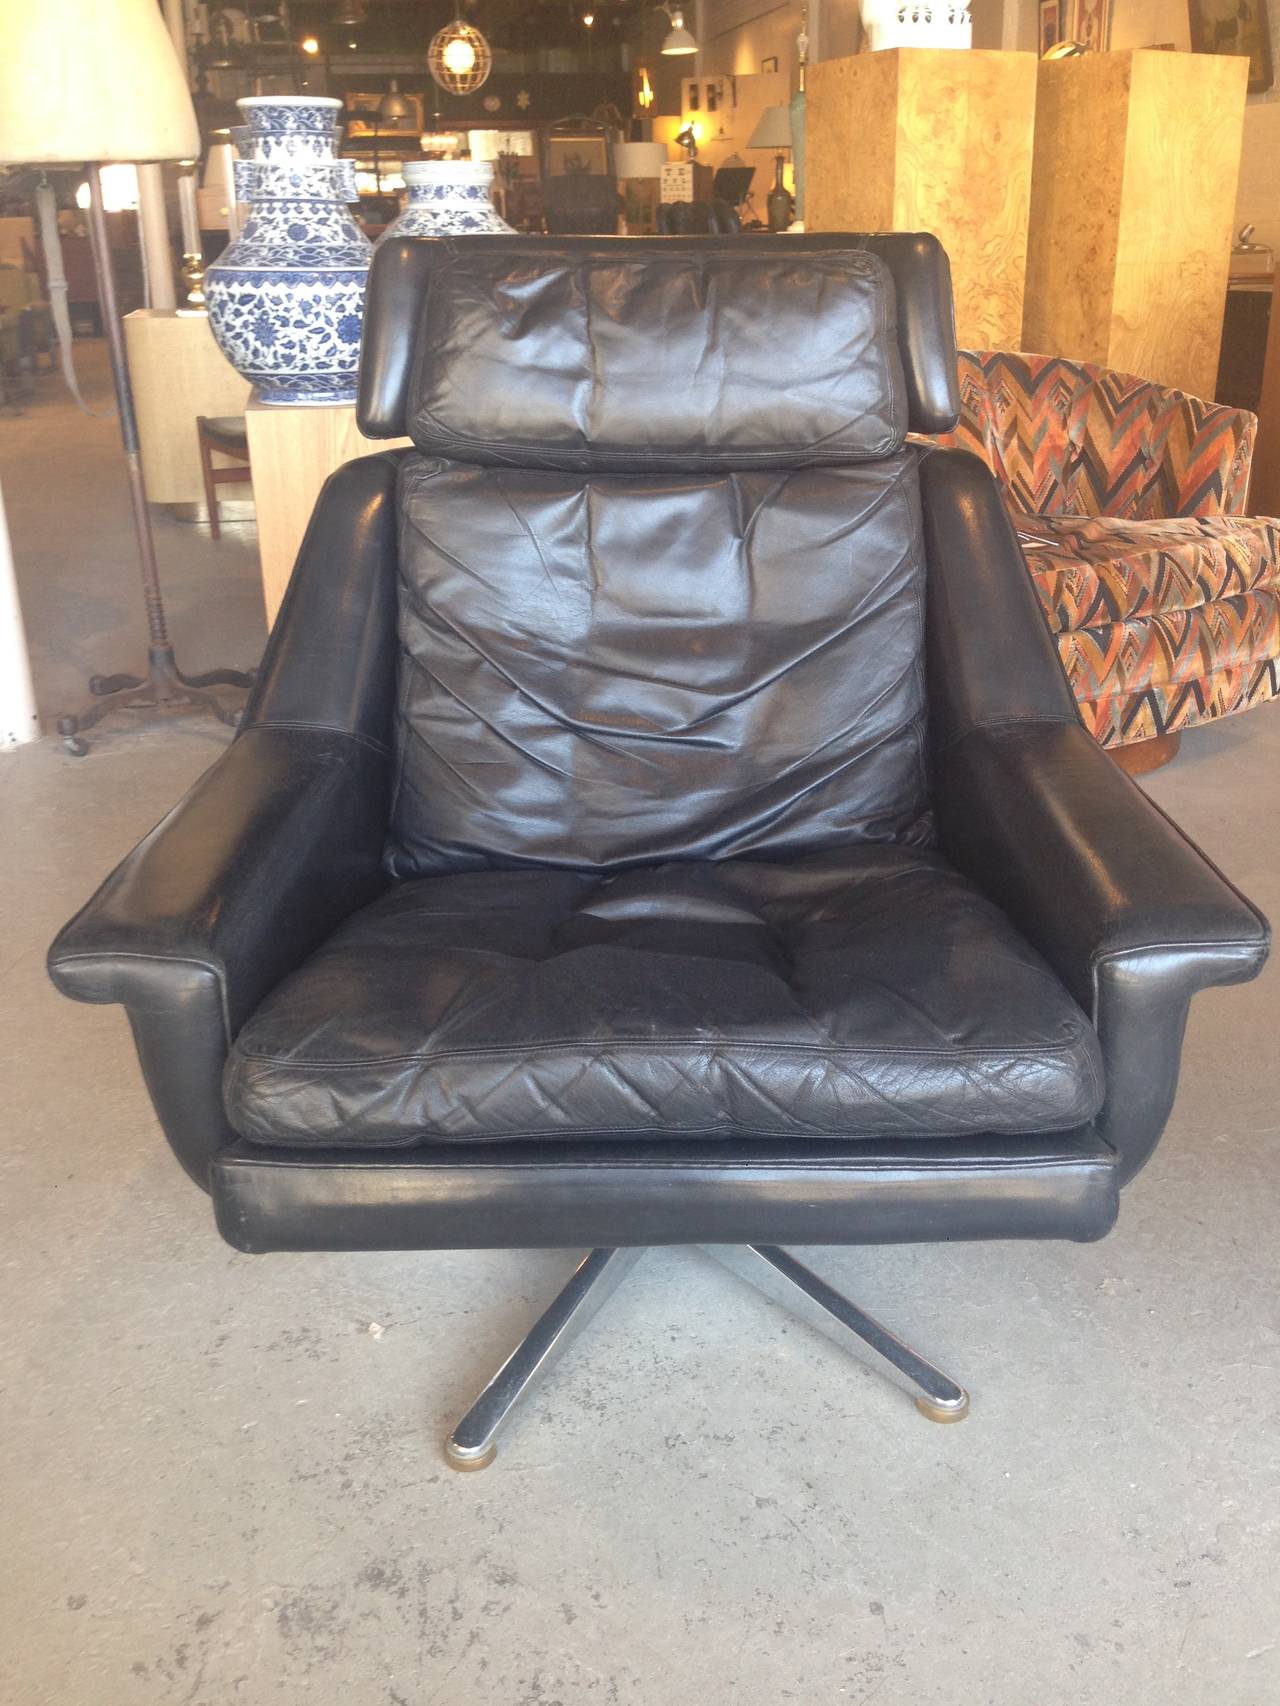 Down cushions. Leather in good shape. Some scuffs here and there but overall in excellent vintage condition. Lounge chair #802. Designed by Werner Langenfeld.